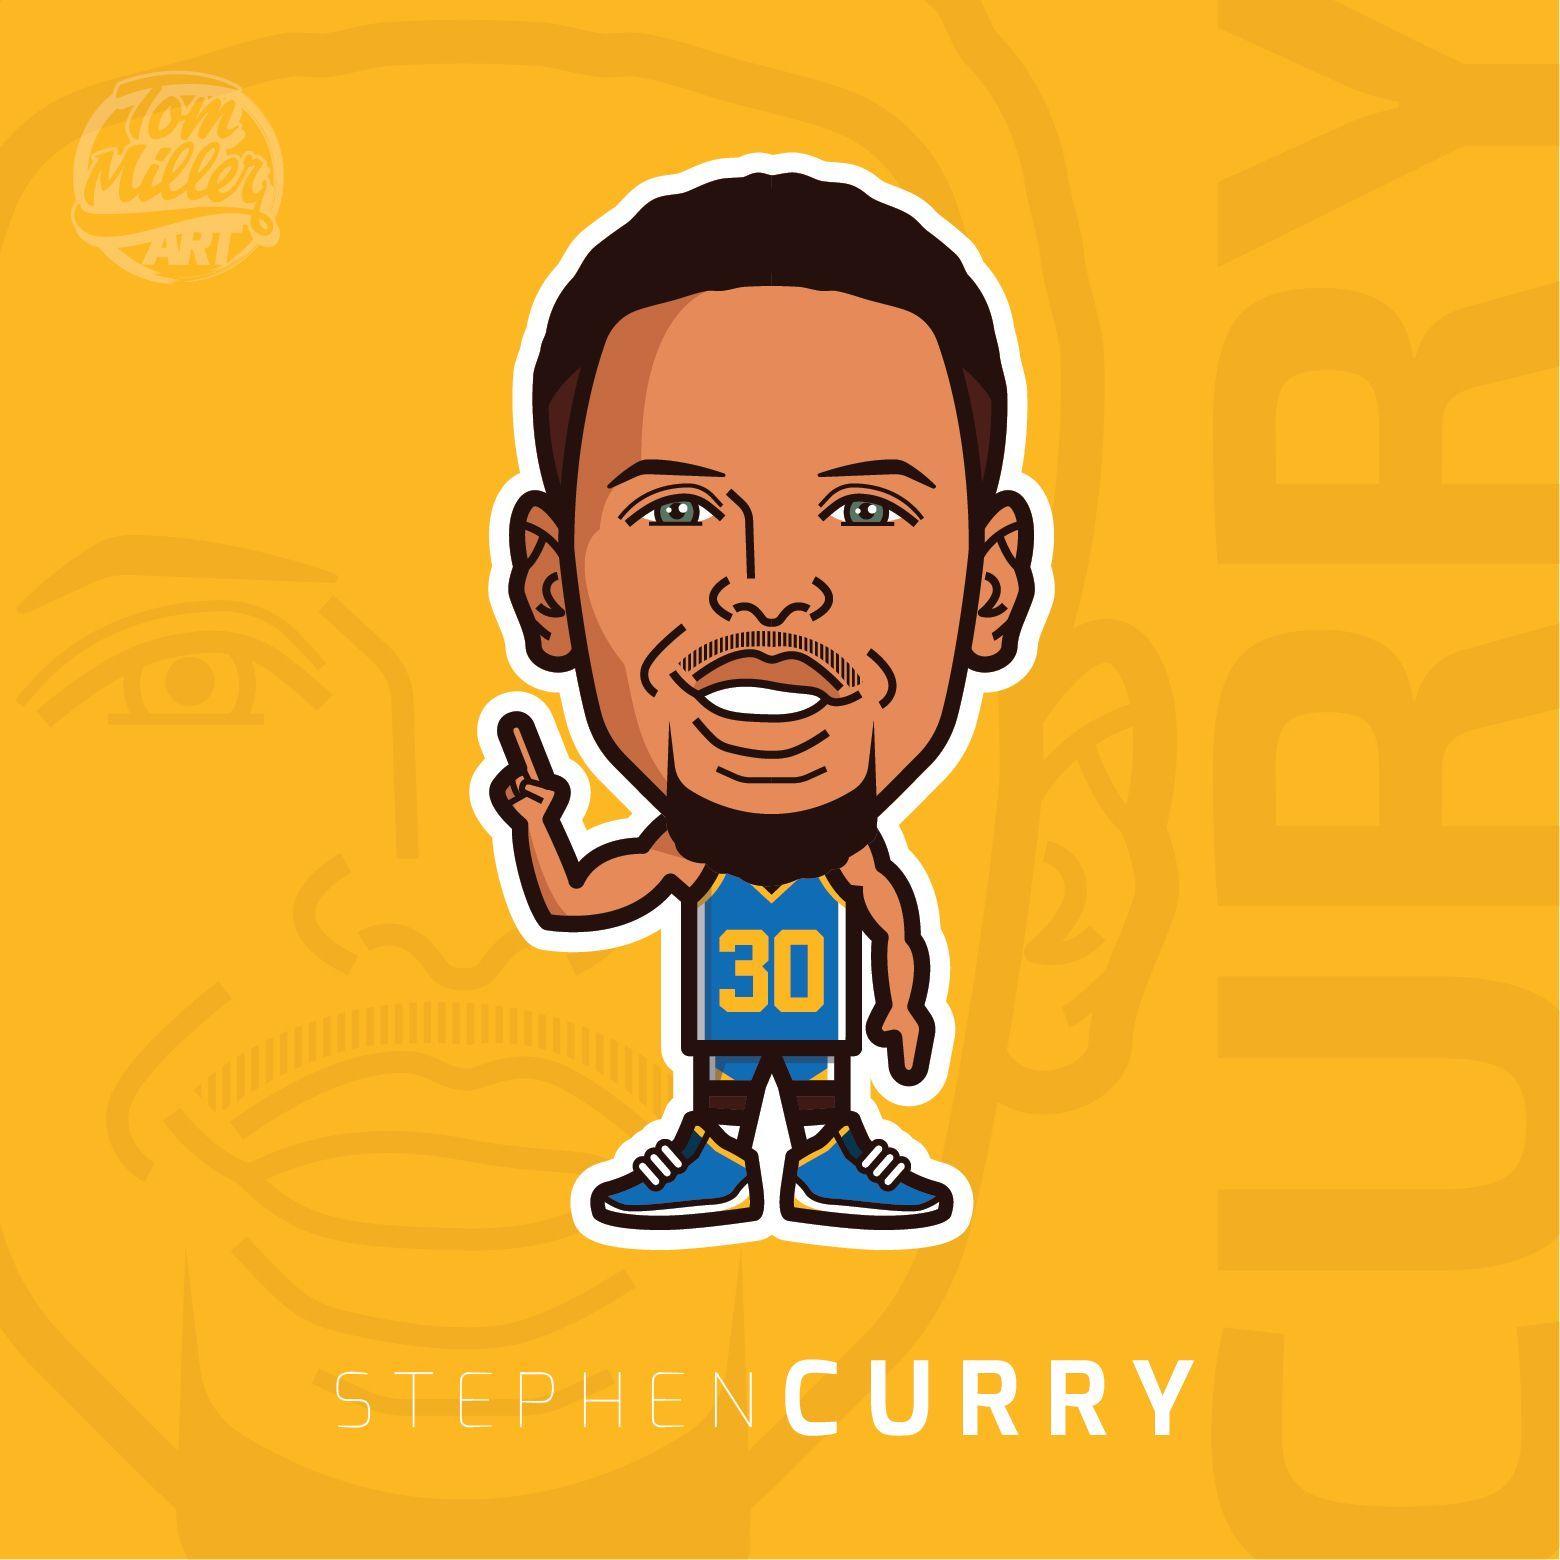 Stephen Curry HD Wallpapers 1000 Free Stephen Curry Wallpaper Images For  All Devices